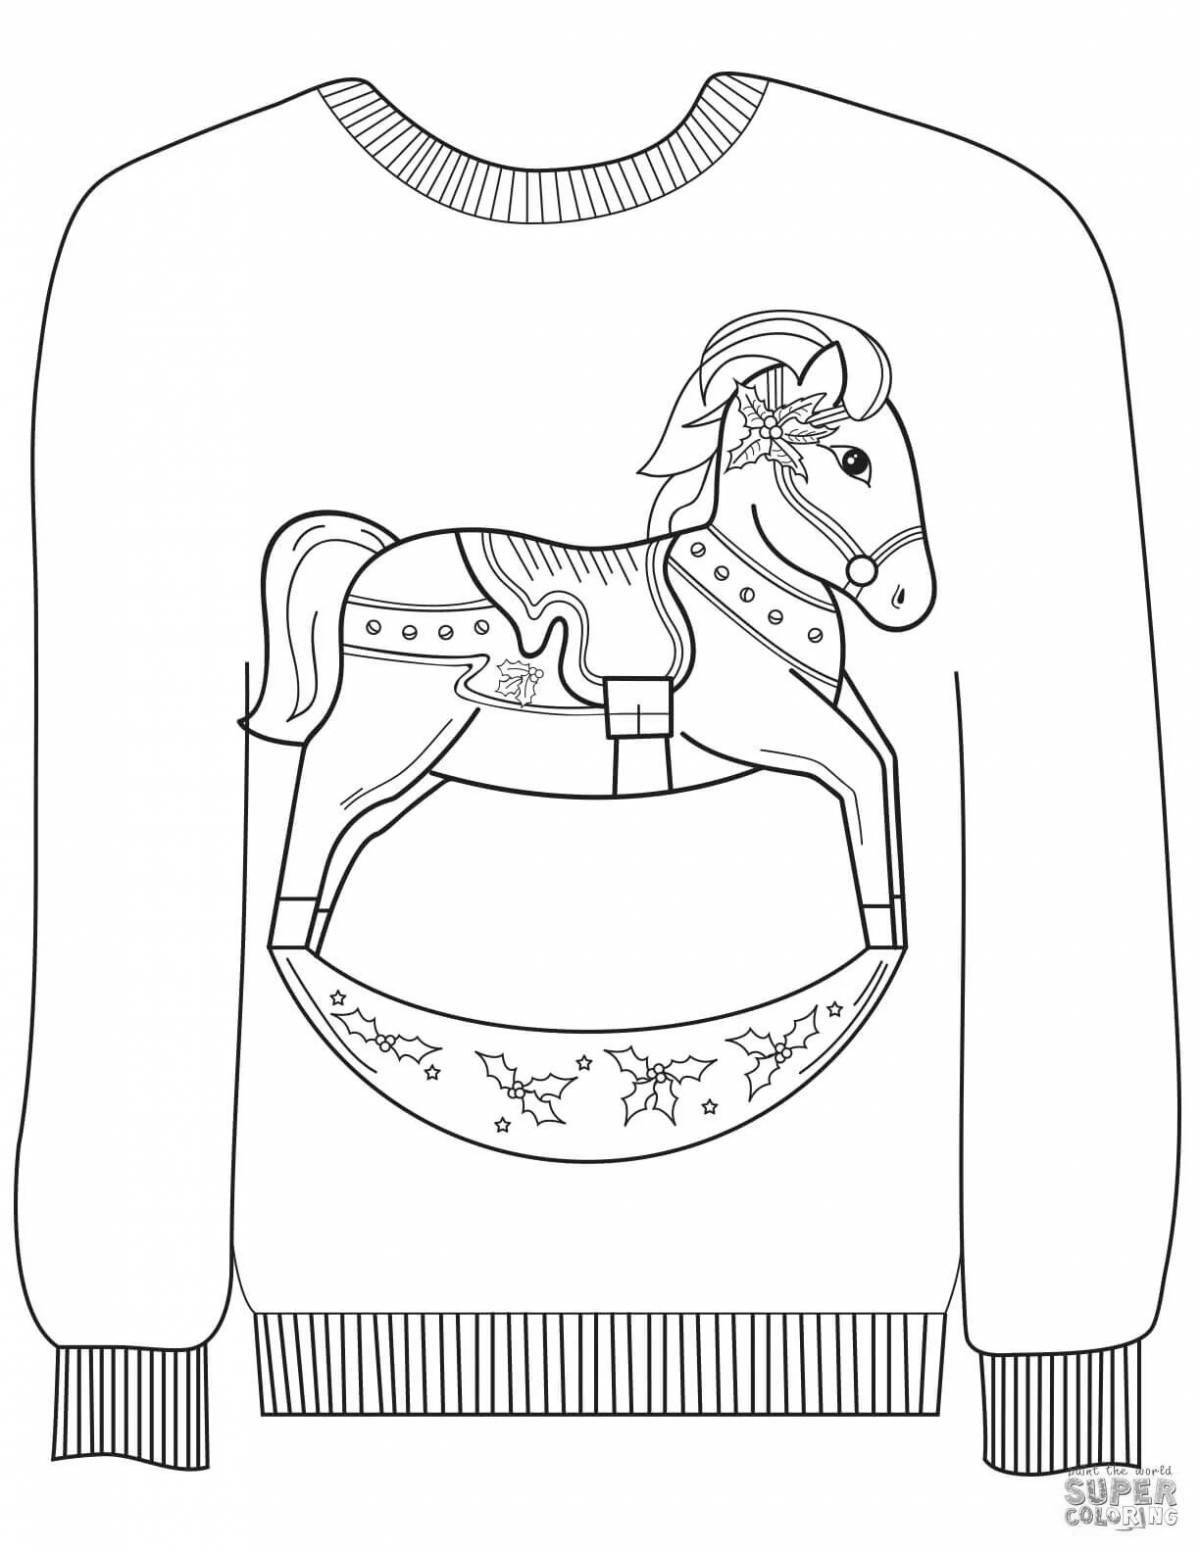 Fat jumper coloring page